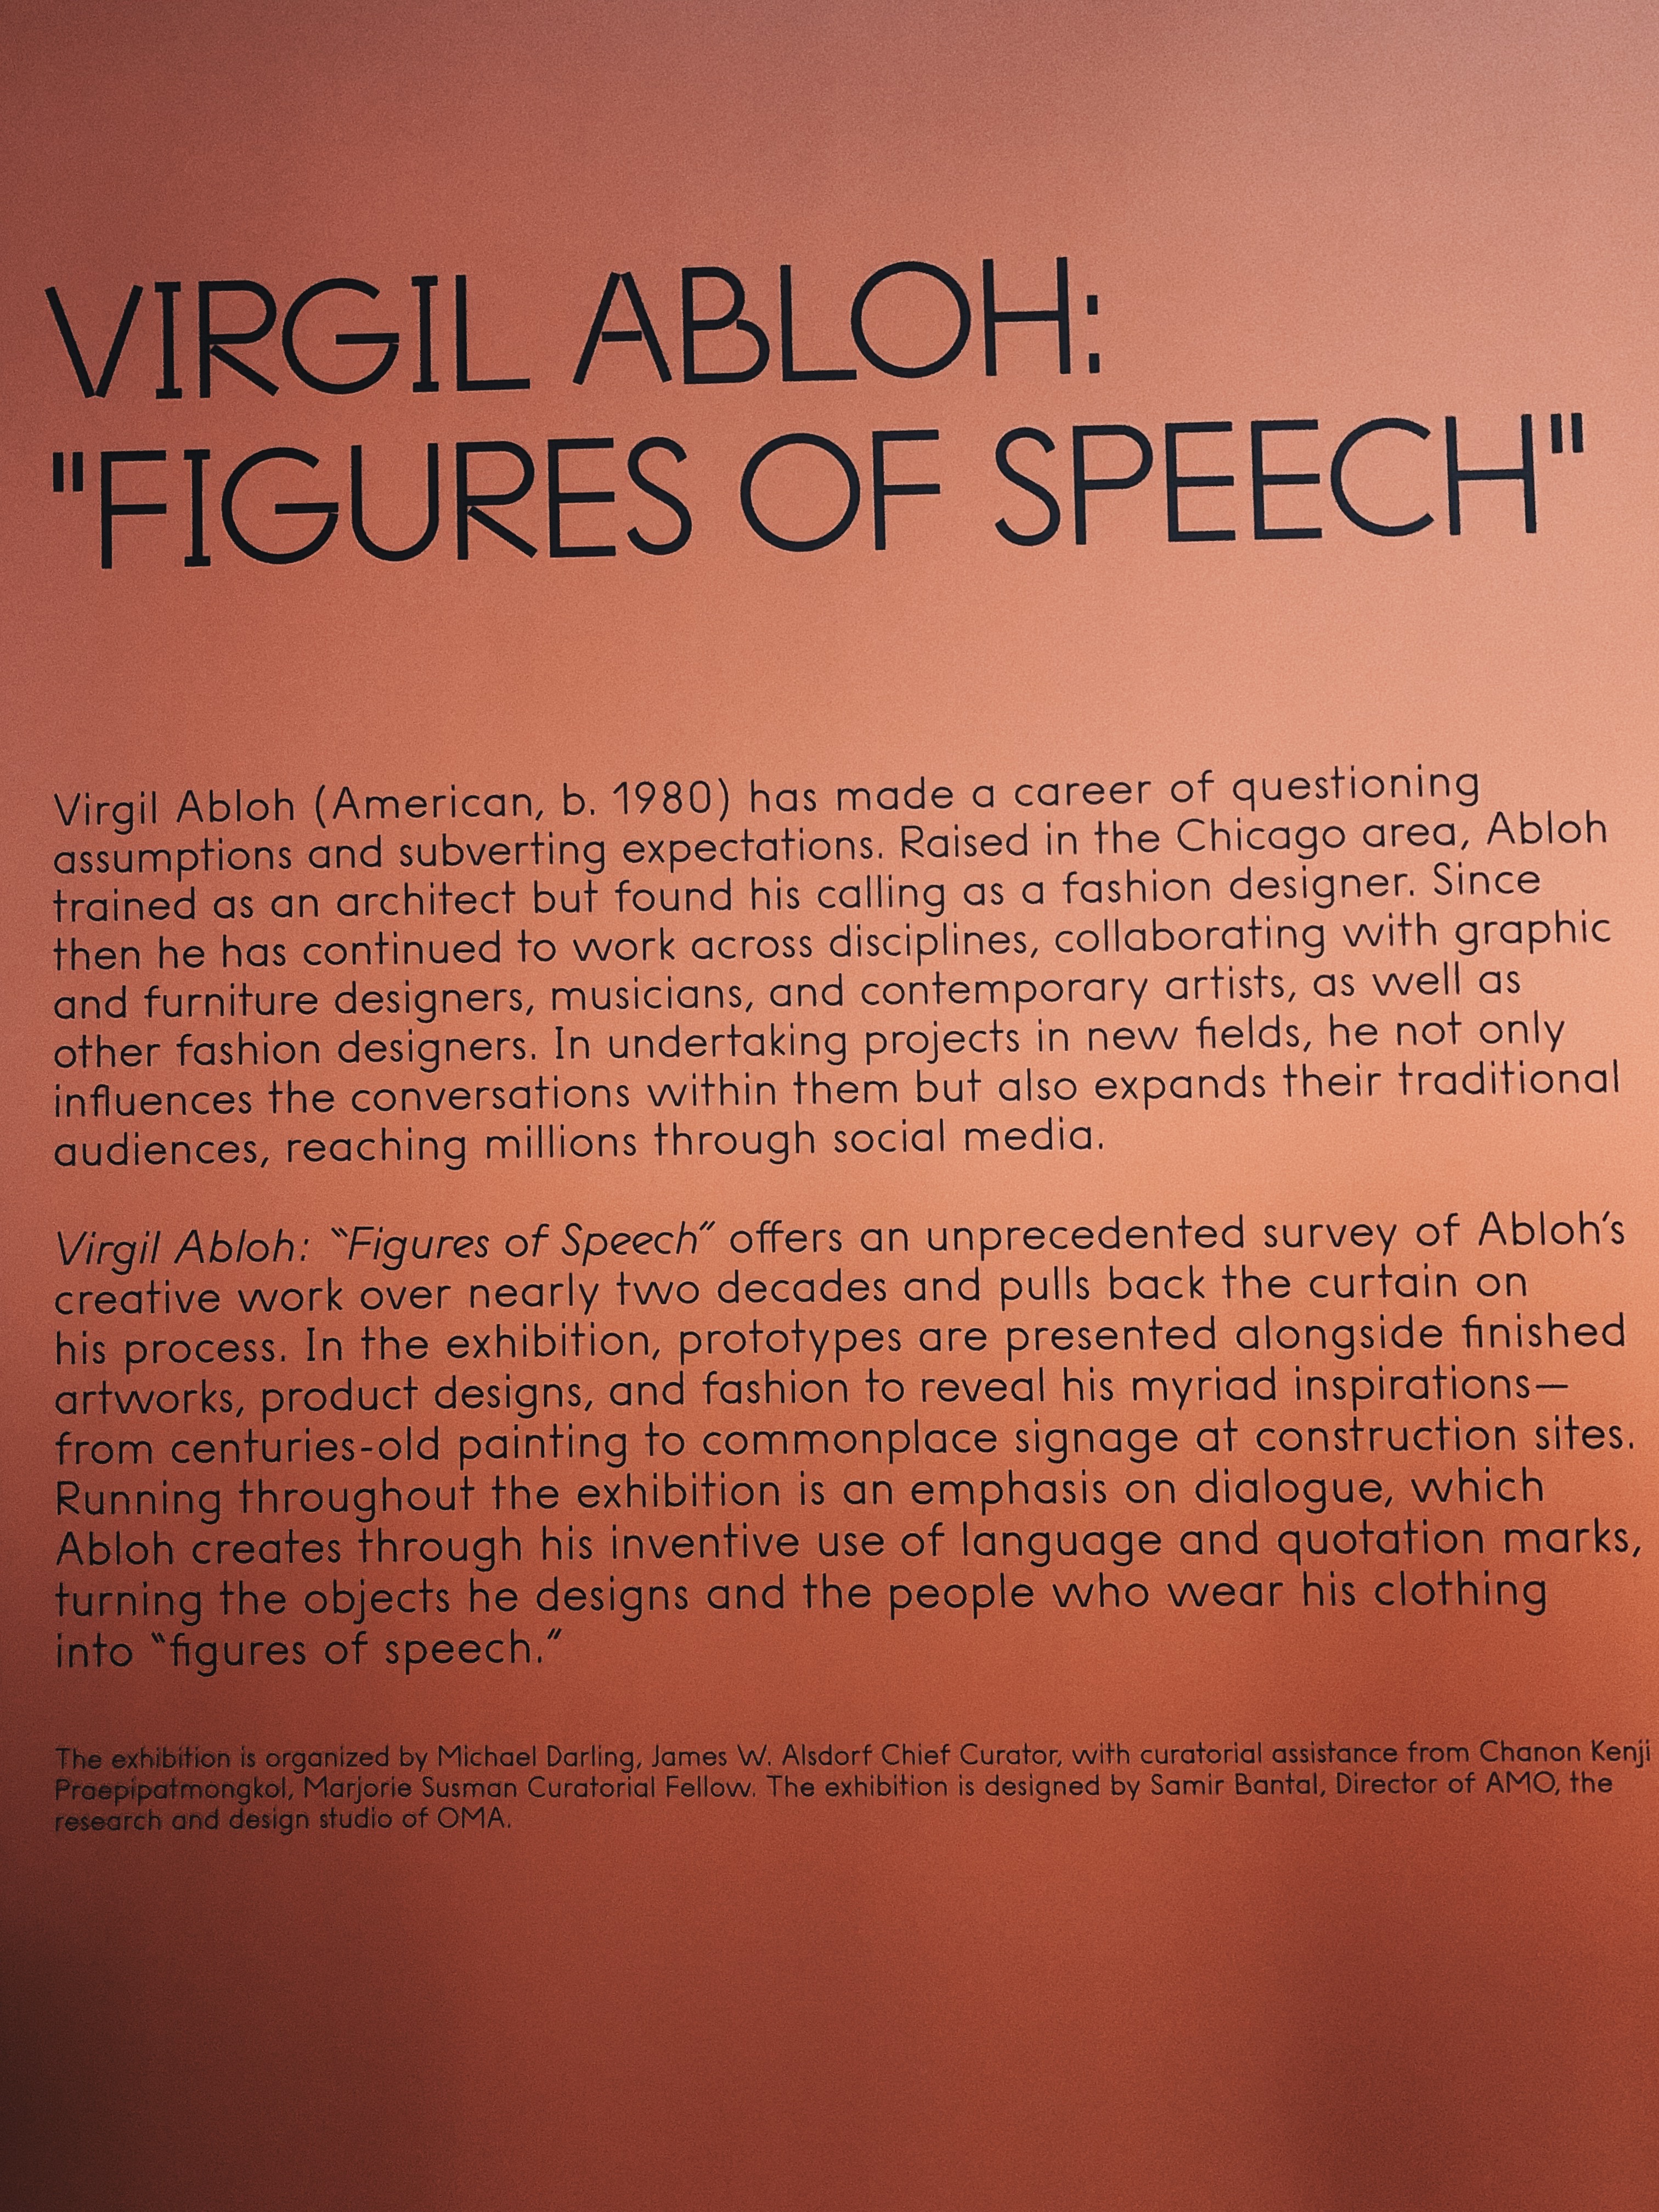 Gallery of AMO Helps to Curate Virgil Abloh Exhibition for the